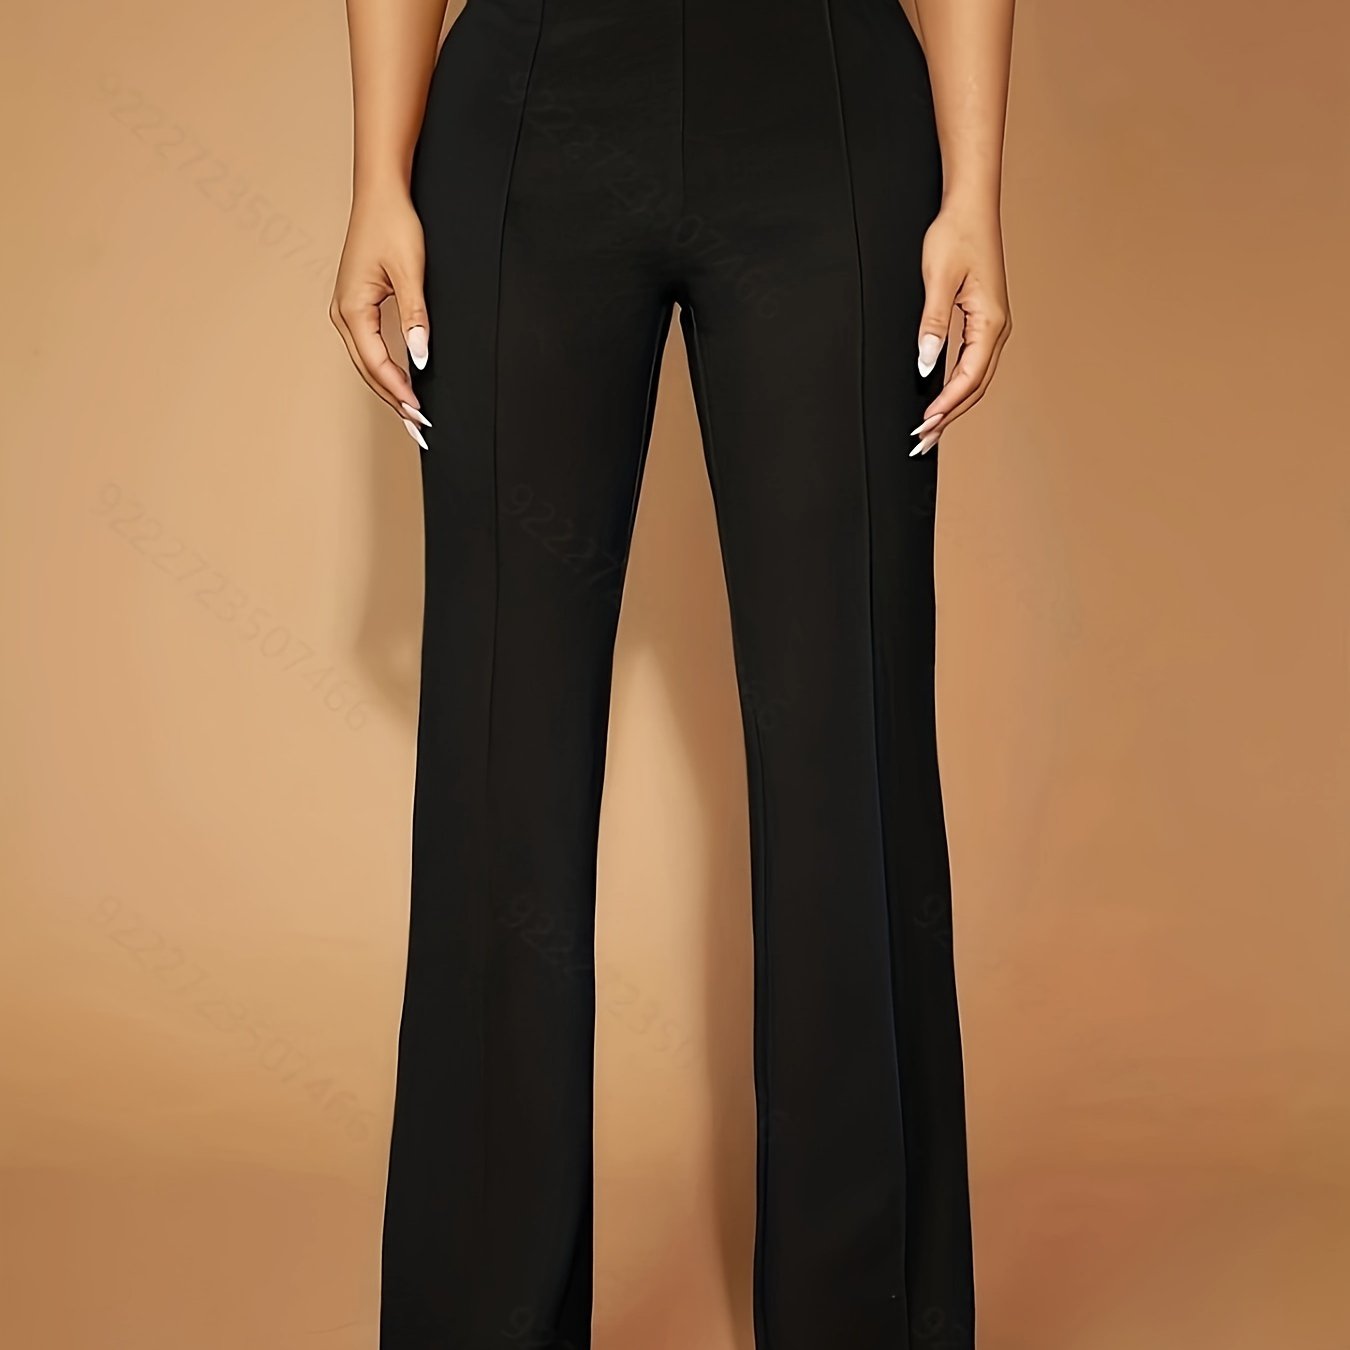 Solid High Waist Slim Pants, Casual Flare Leg Pants For Spring